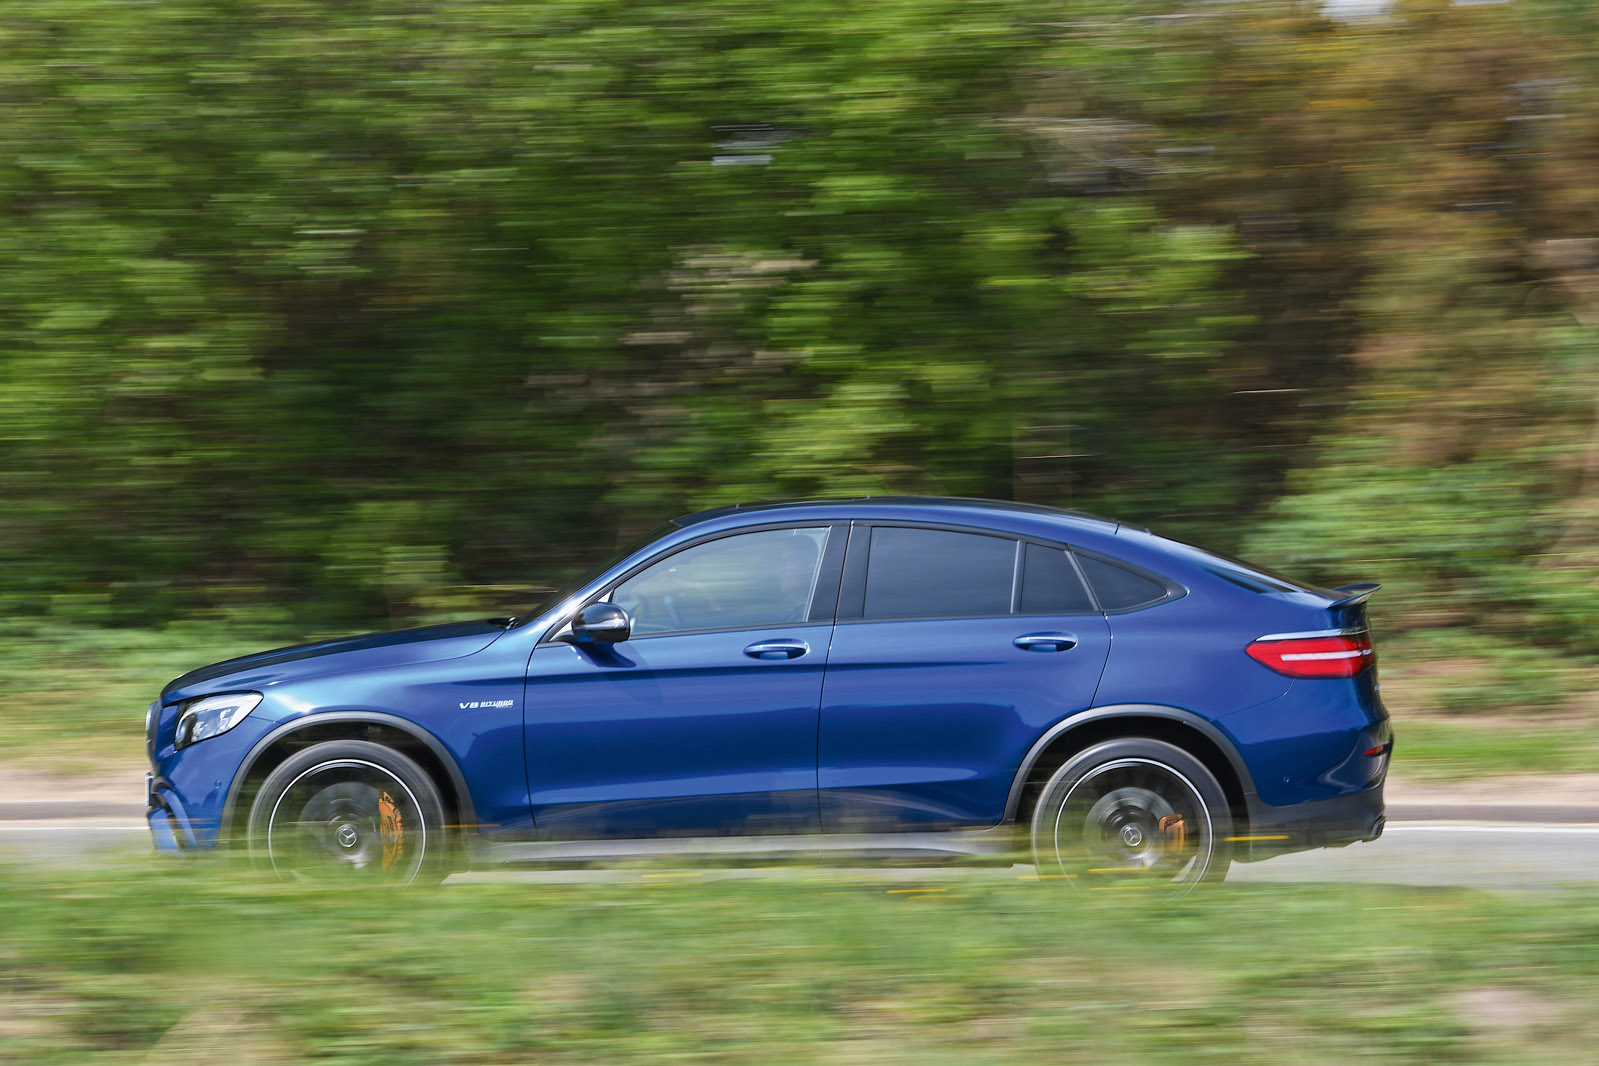 Mercedes-AMG GLC 63 S road test review on the road side